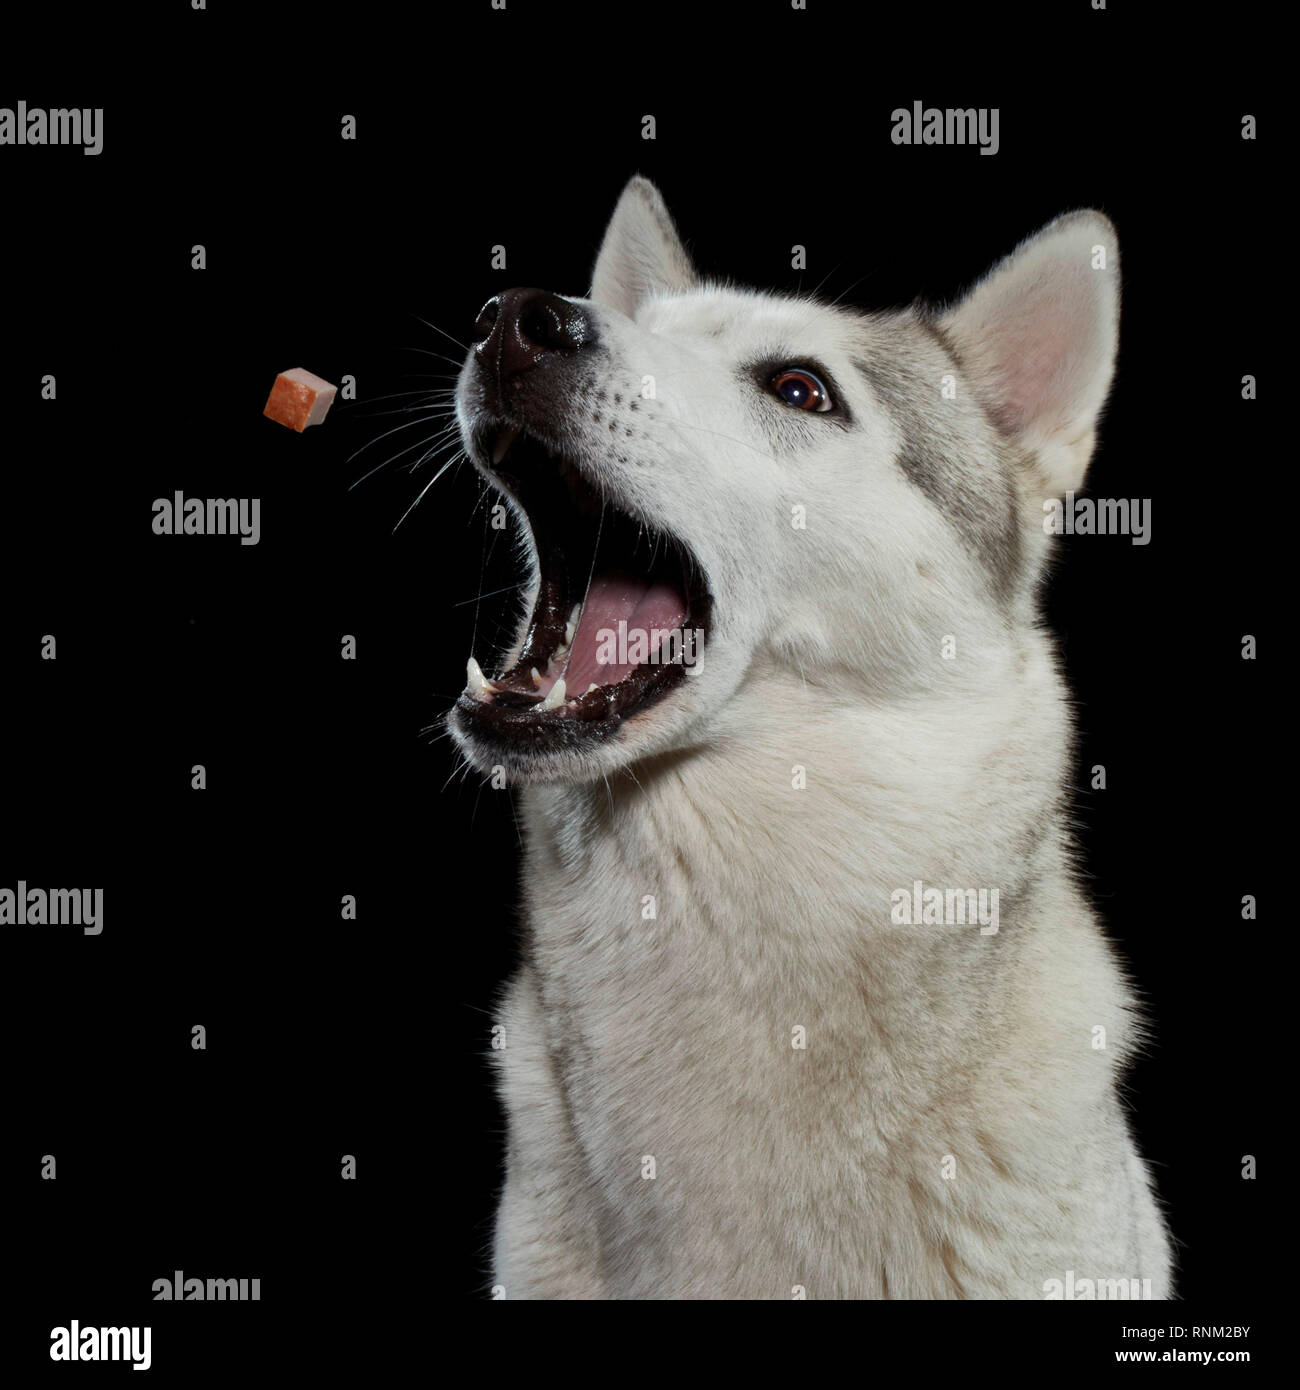 Siberian Husky. Adult catching a treat. Studio picture against a black background. Germany Stock Photo